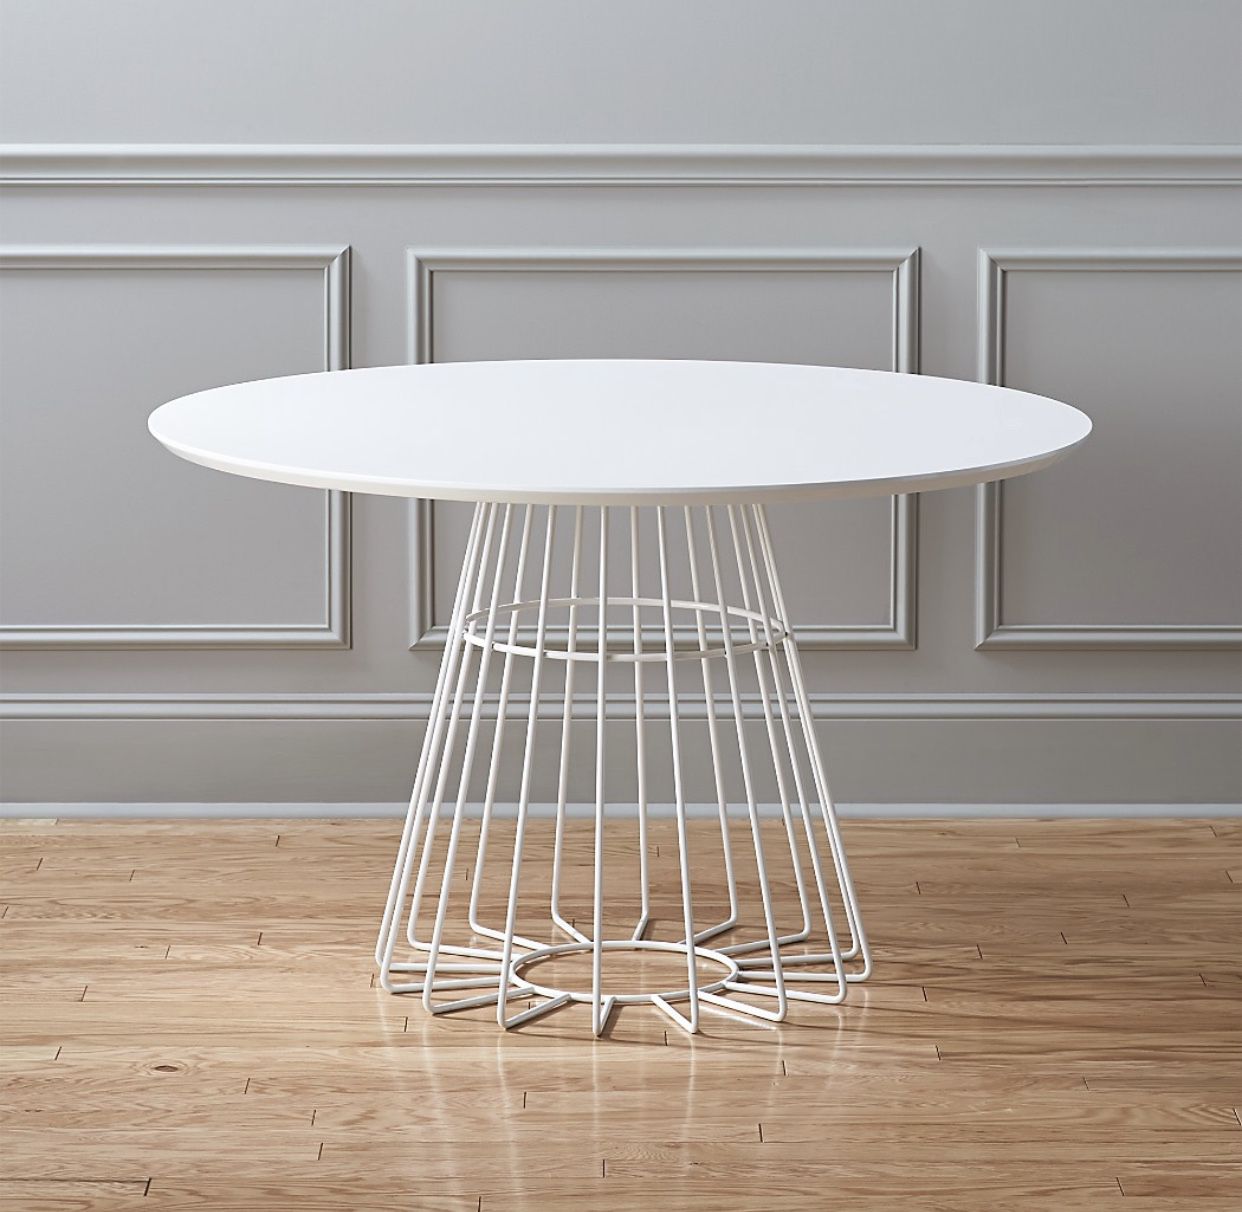 CB2 48” Round Dining Table